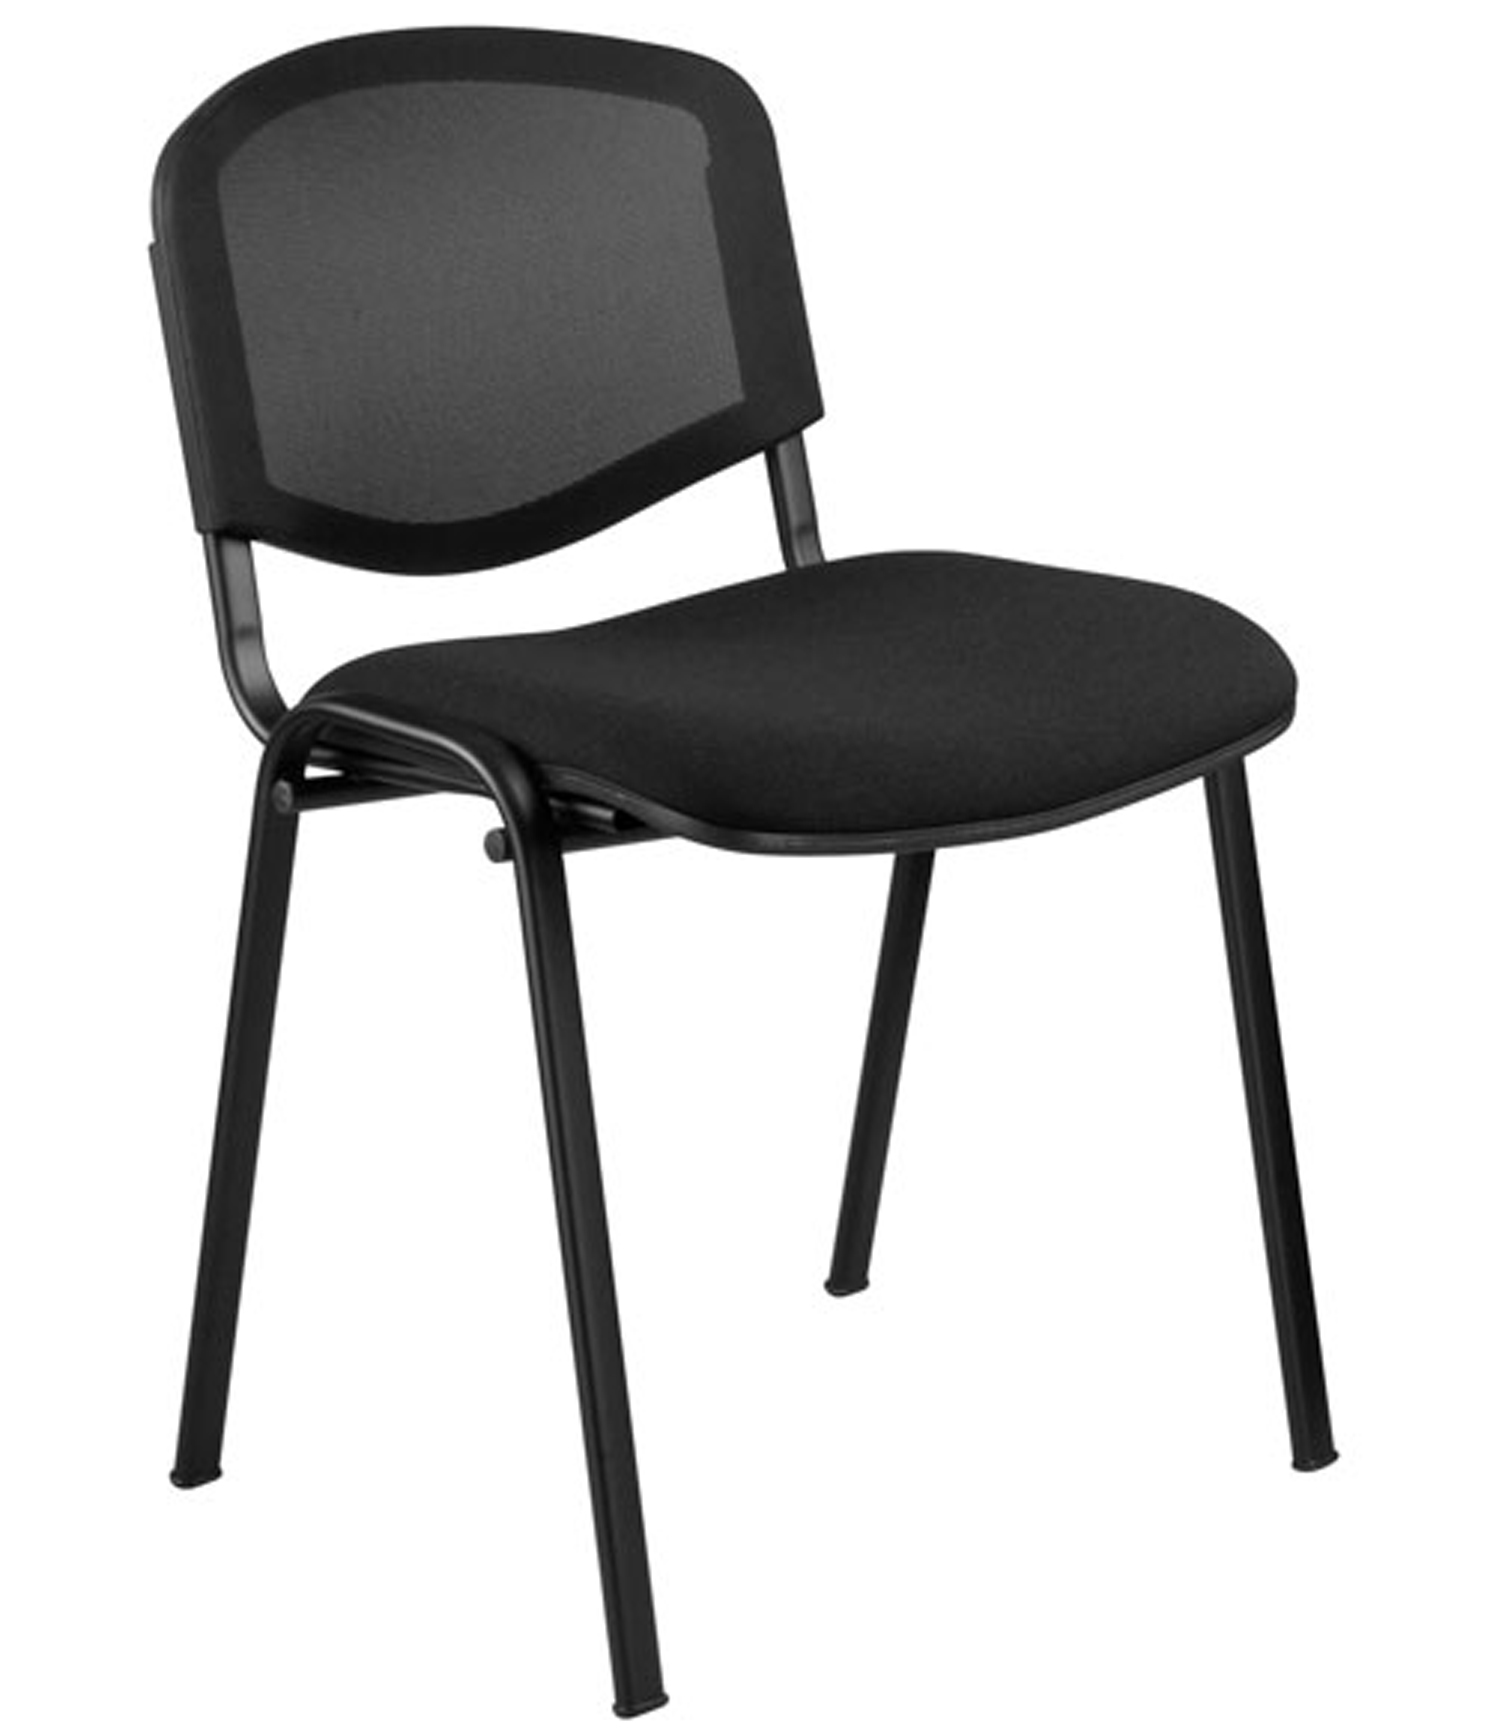 Mesh Back Conference Chair